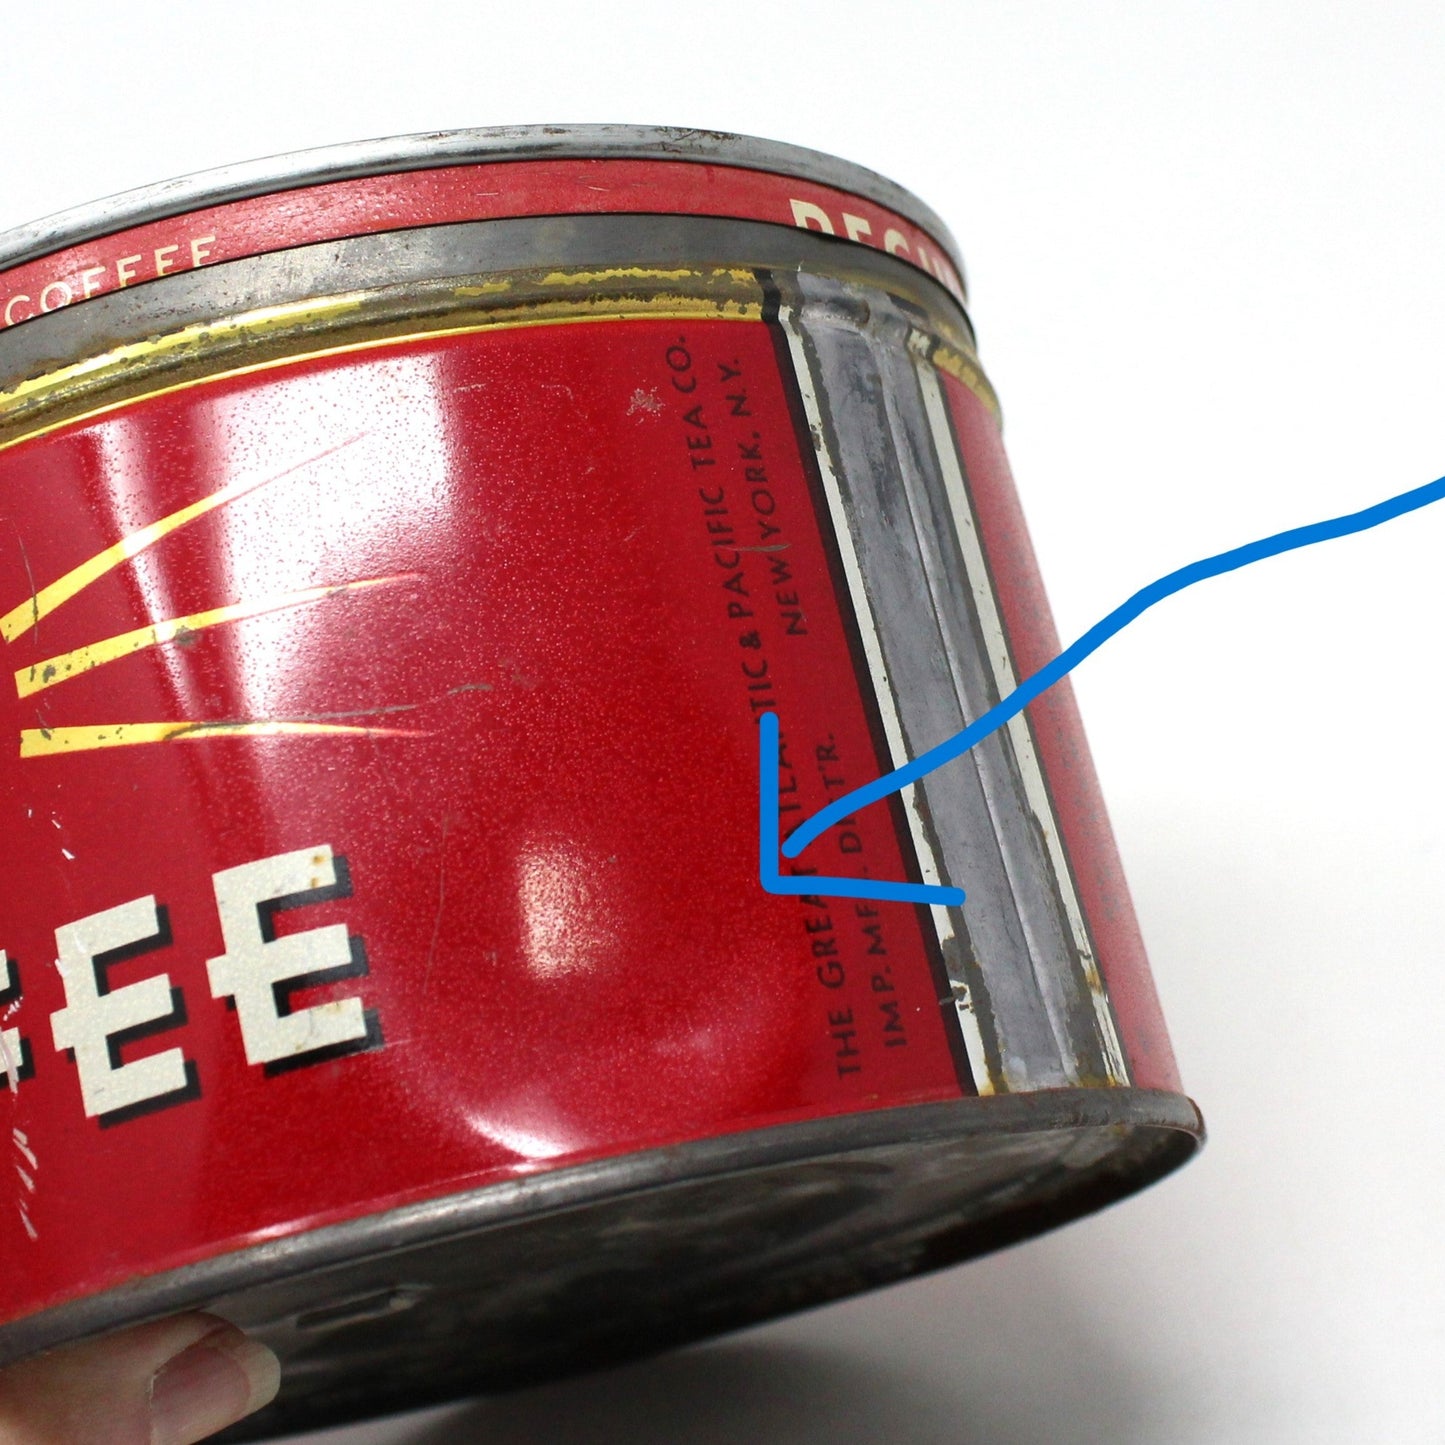 Coffee Can Tin, A&P Collectible Red Coffee Can, Key Wind, 1 lb, Vintage